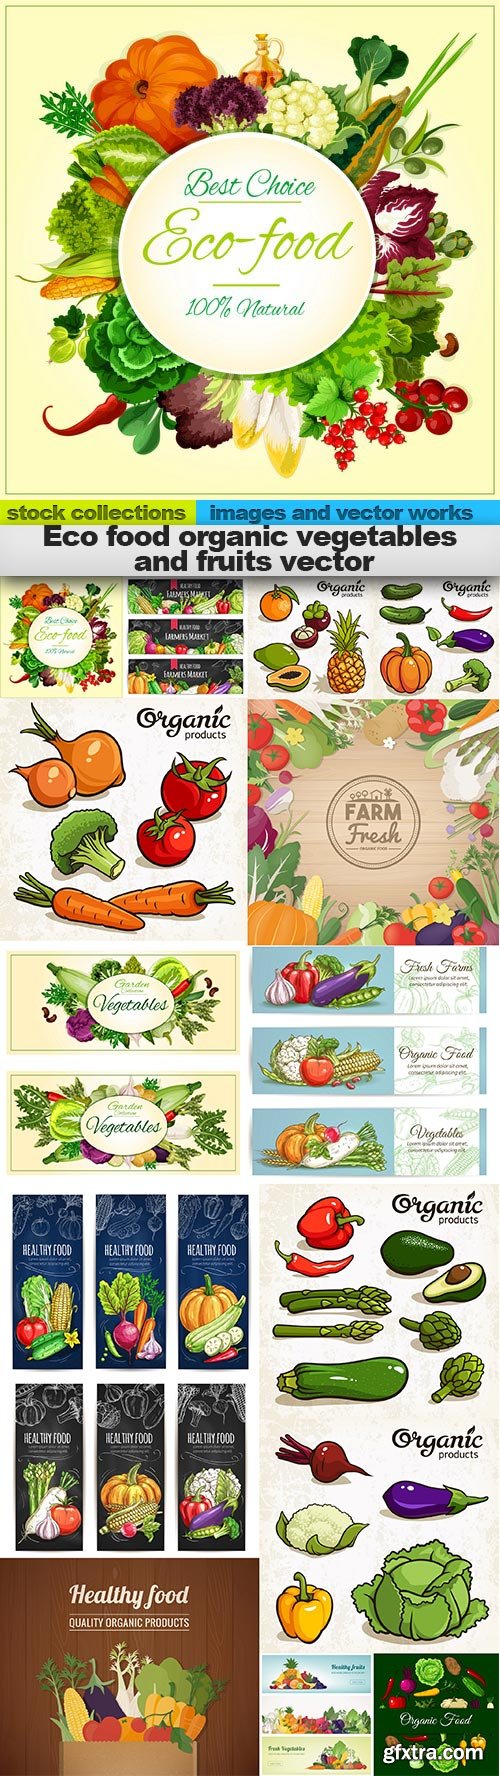 Eco food organic vegetables and fruits vector, 15 x EPS